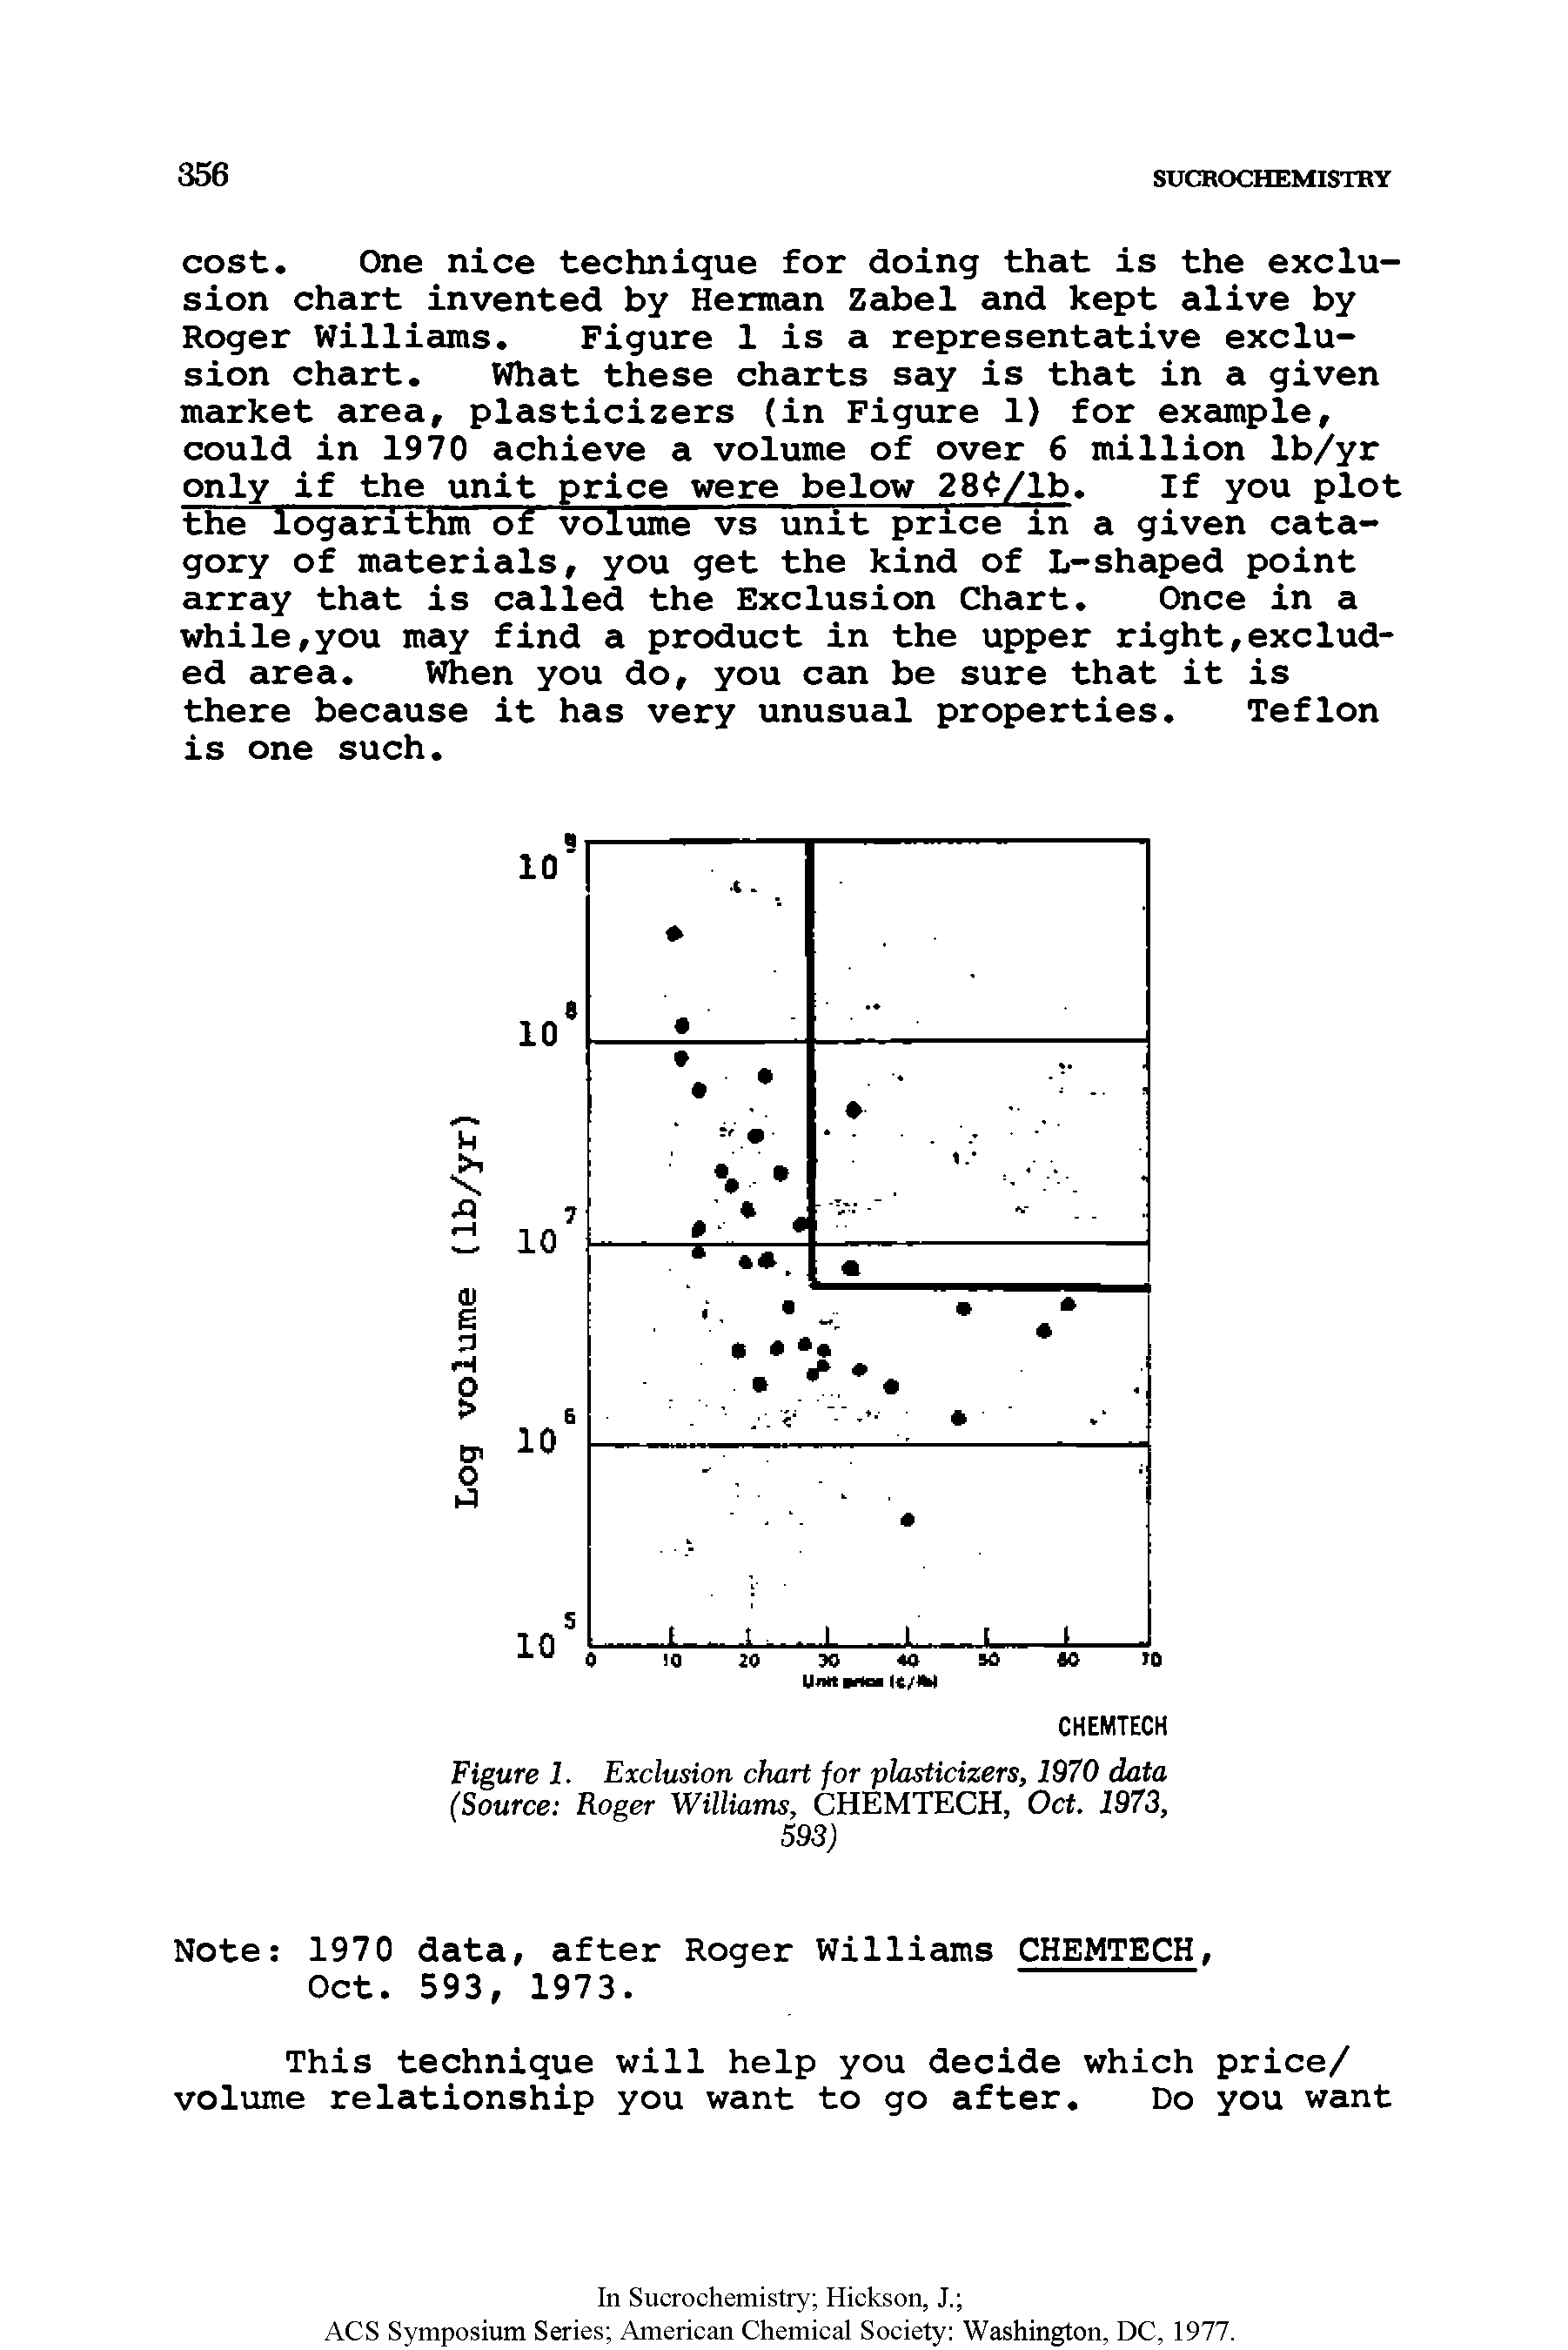 Figure 1. Exclusion chart for plasticizers, 1970 data (Source Roger Williams, CHEMTECH, Oct. 1973, 593)...